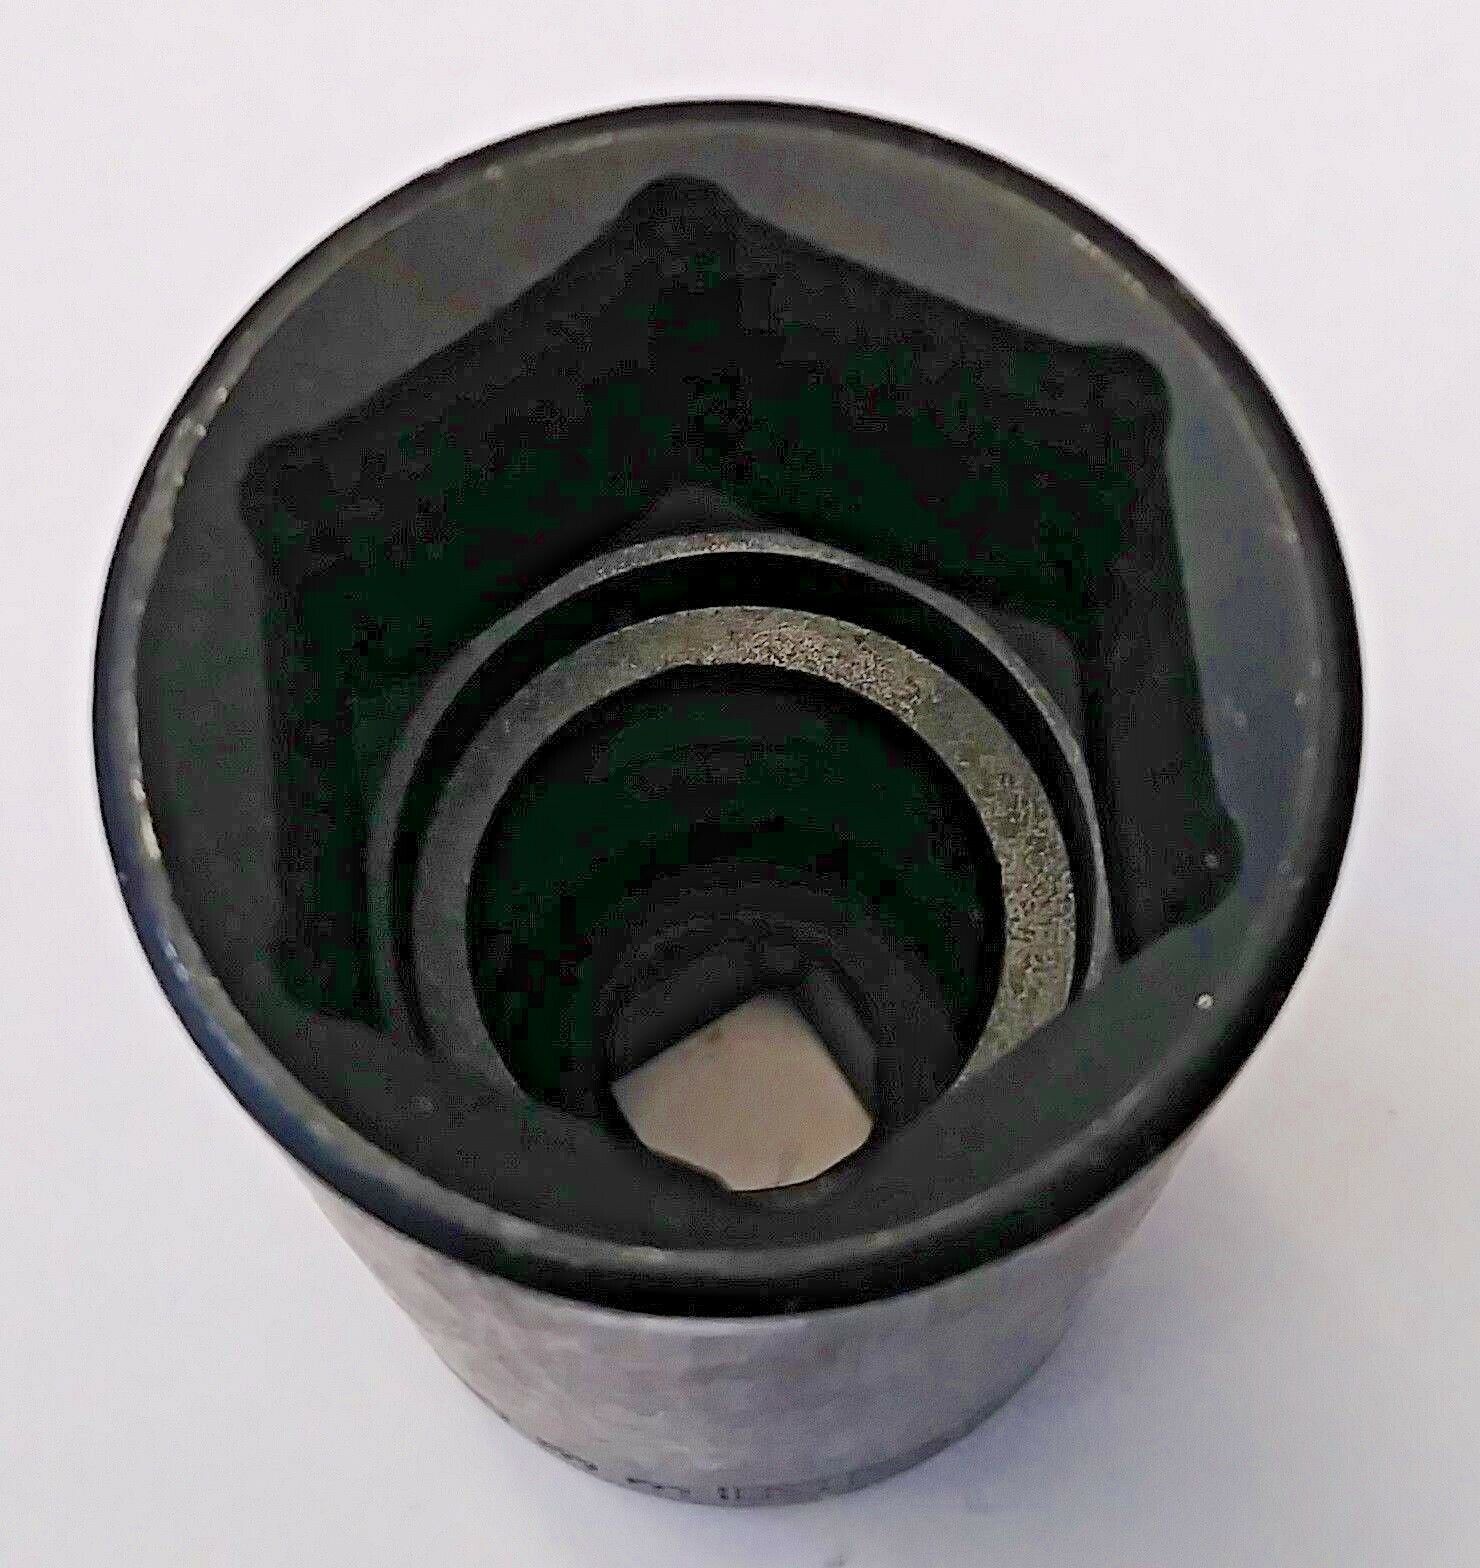 Armstrong 47-230A 1/2" Drive 6 Point Deep Impact Socket 30mm USA